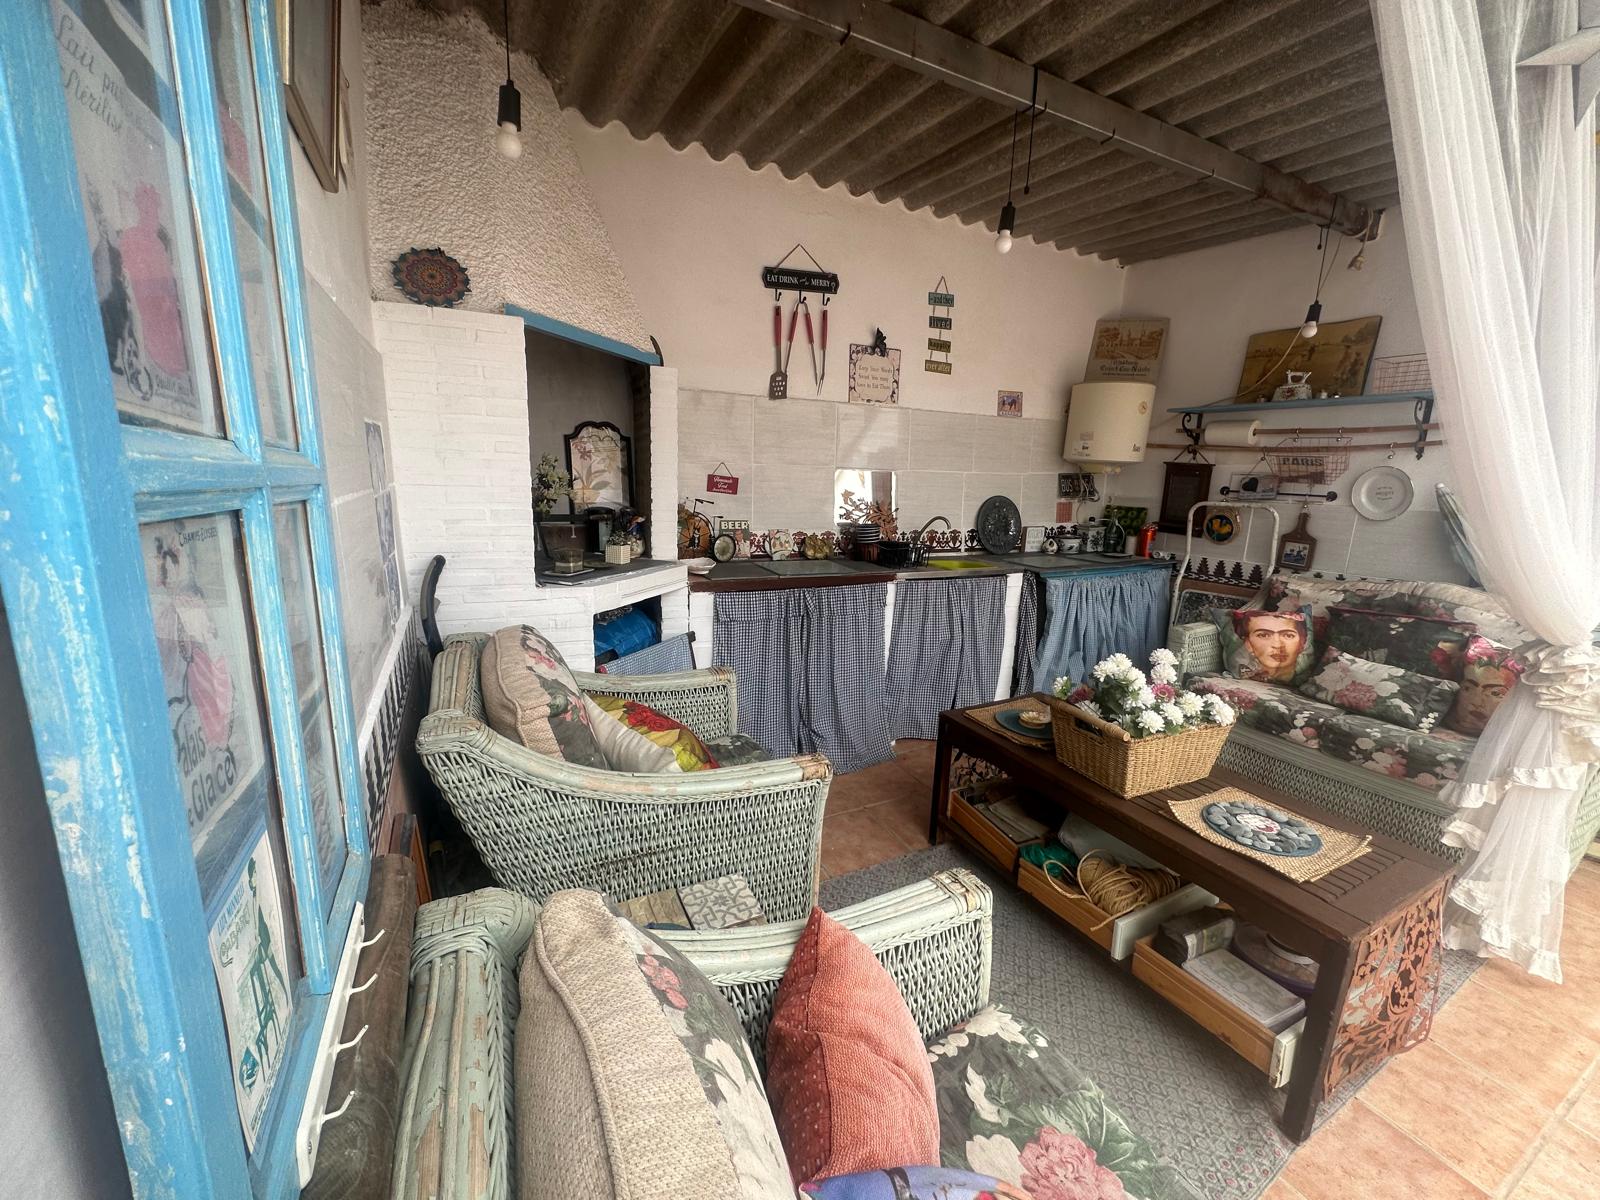 FANTASTIC 2 BEDROOM COTTAGE HOUSE IN THE COUNTRY CLOSE TO SEA